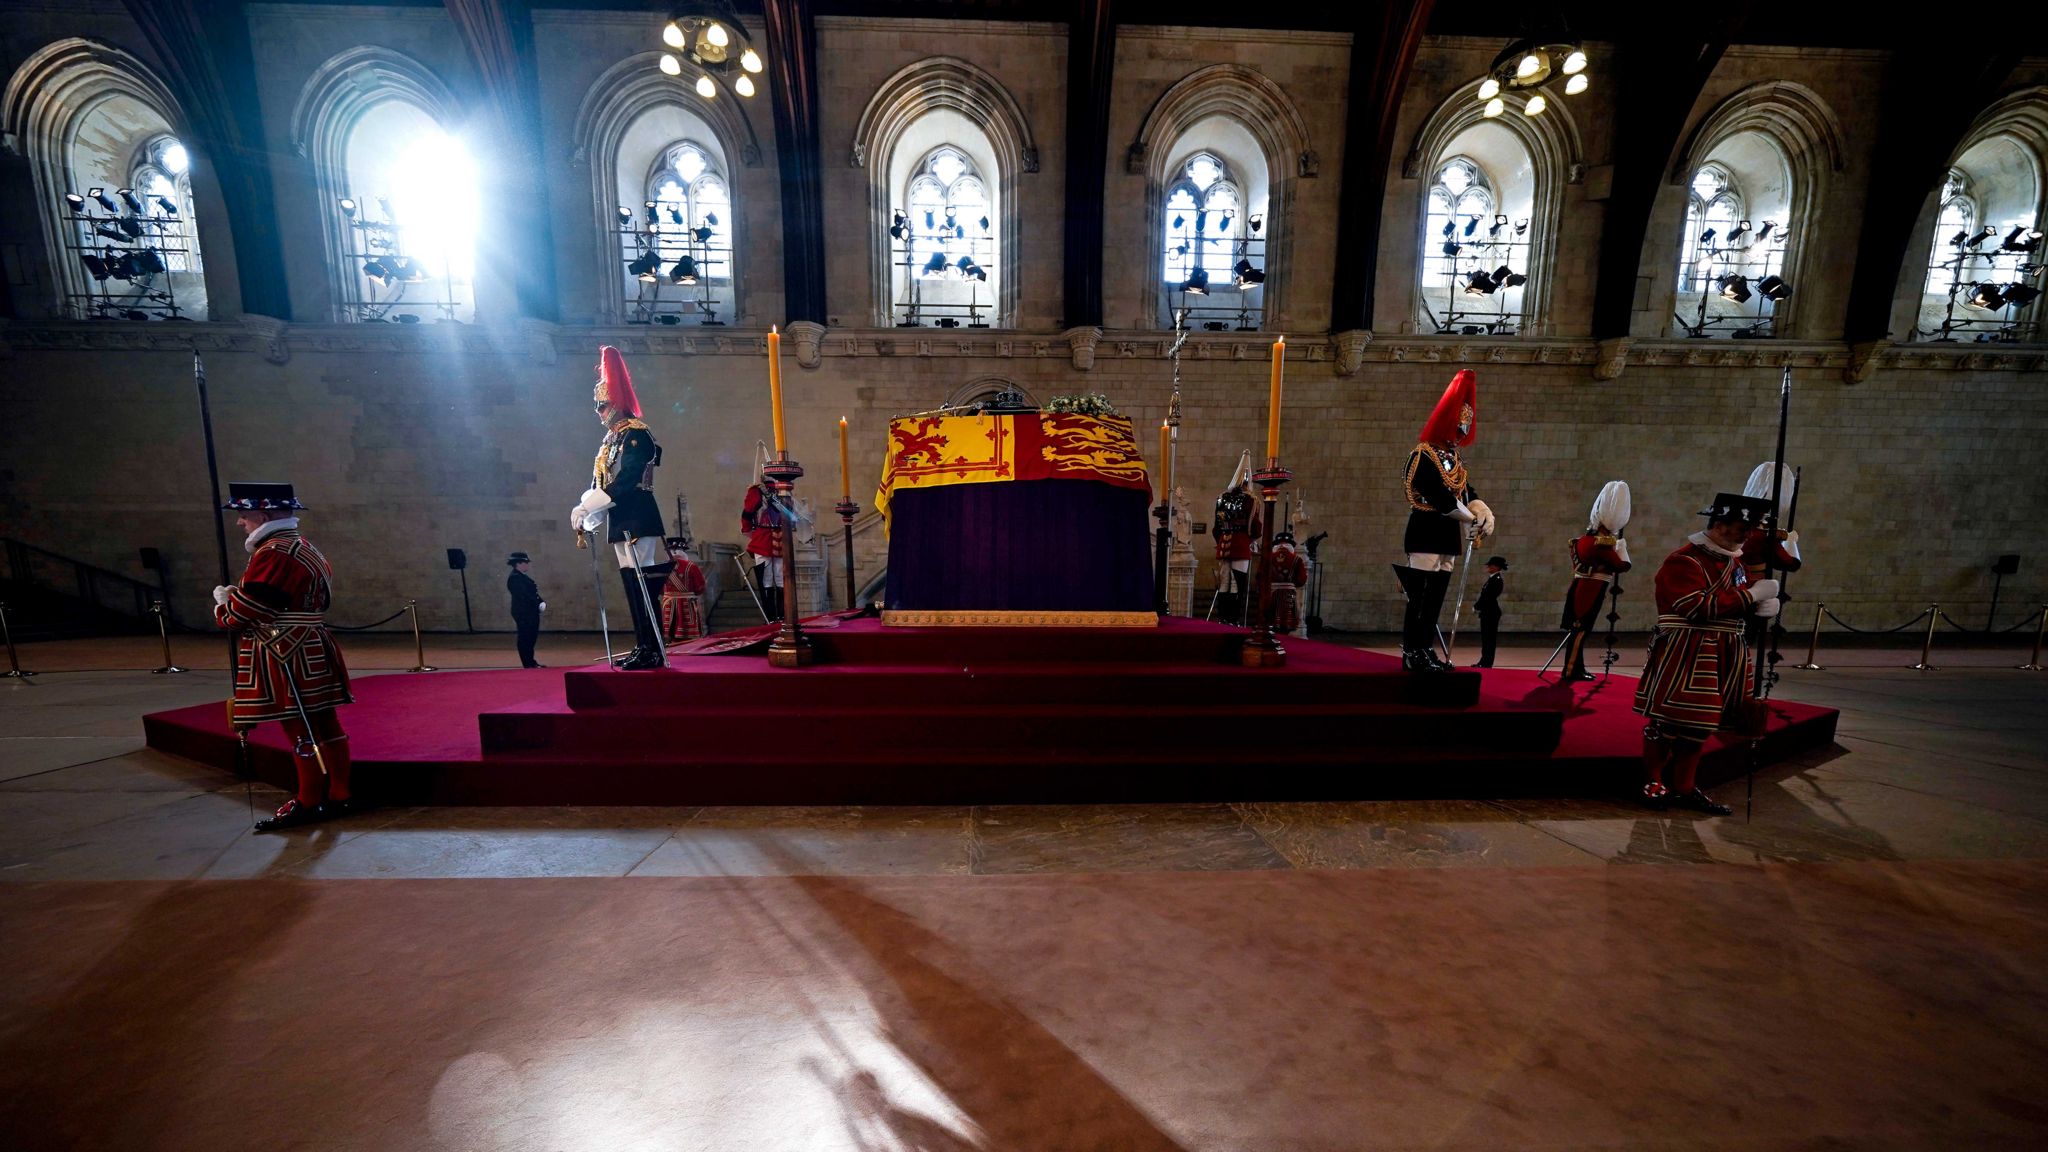 The Queen's coffin lying in state